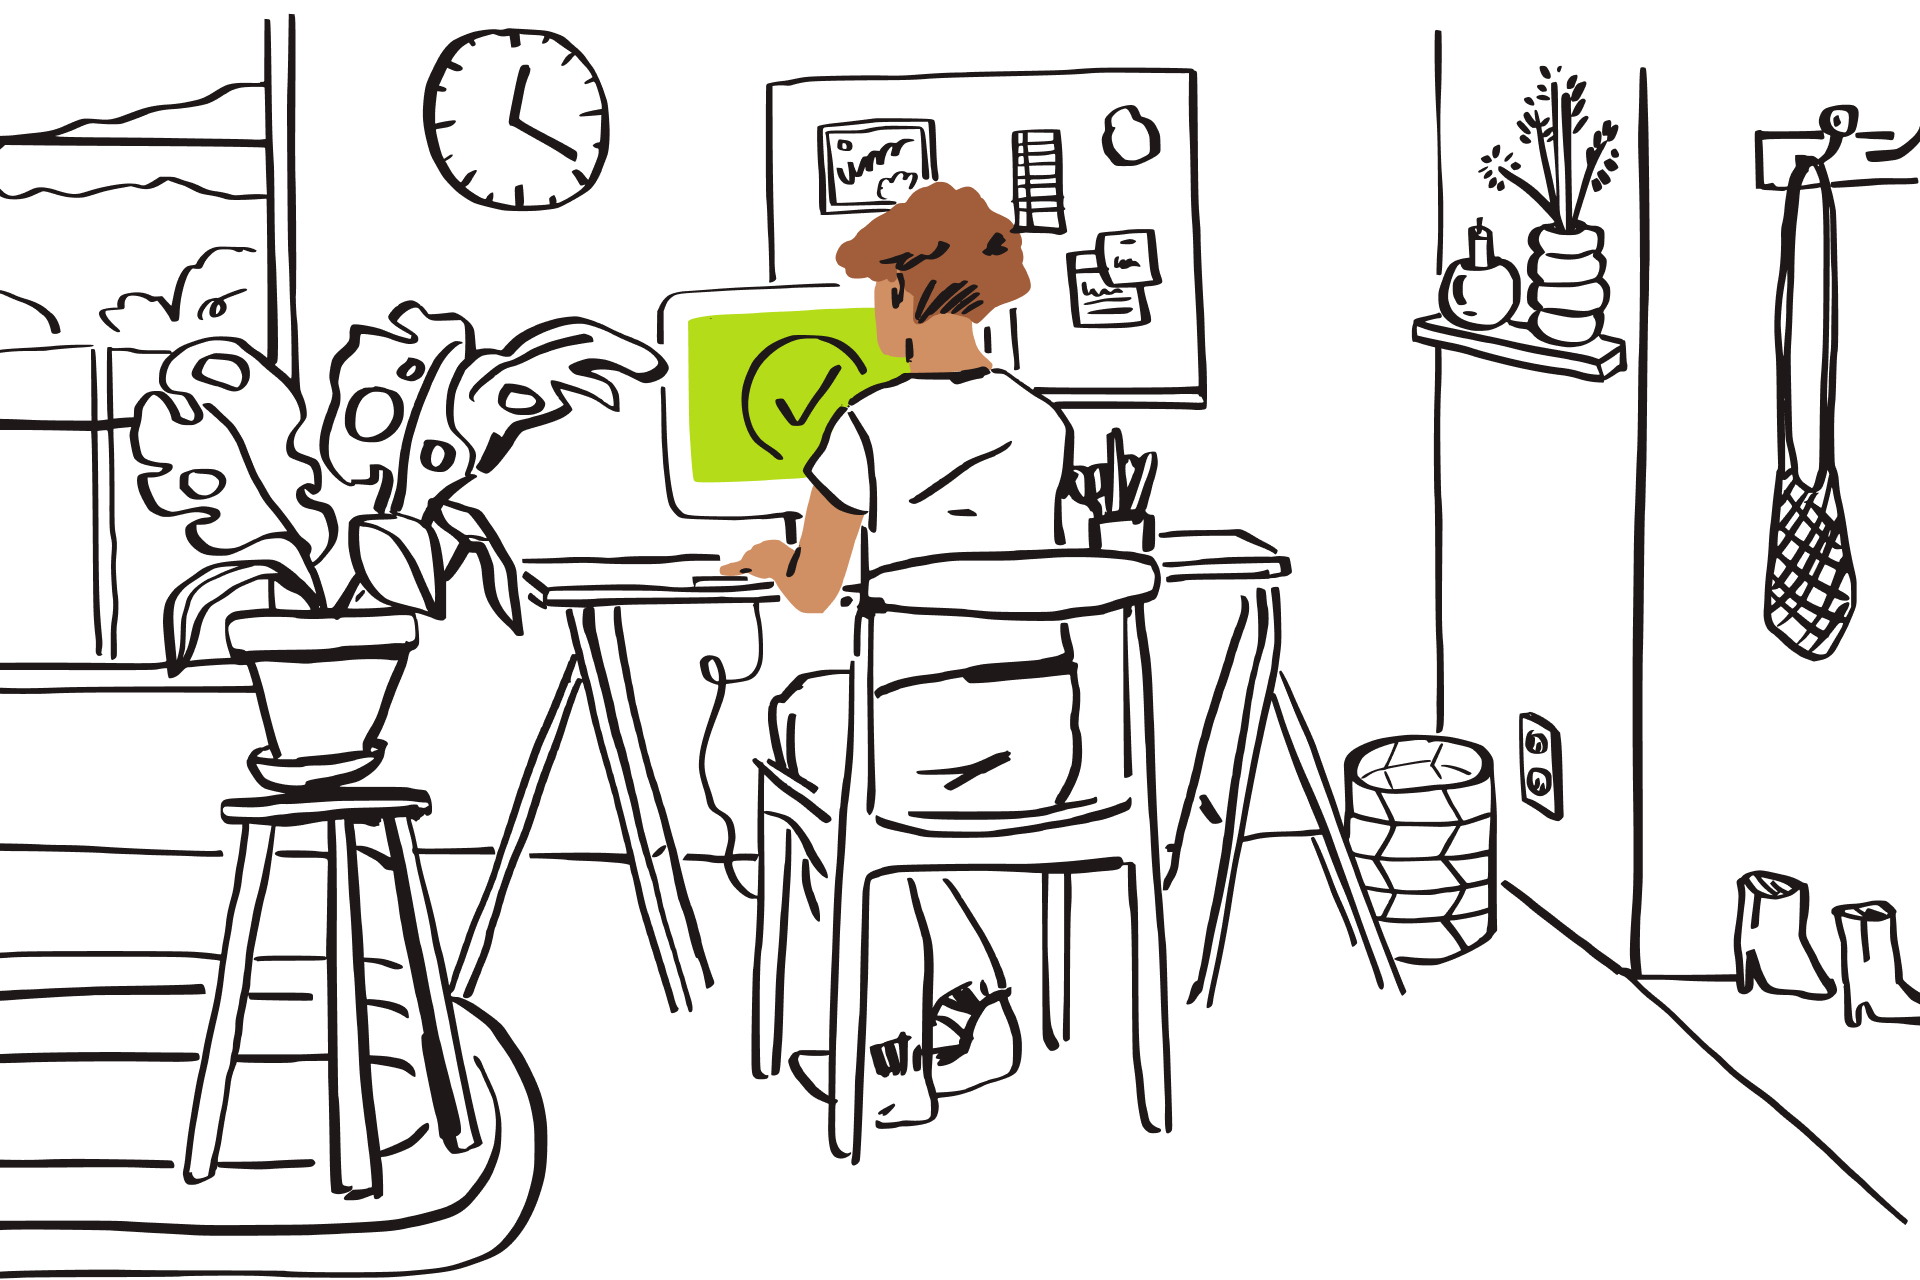 Black line illustration of a room with person typing at a computer with a green screen and tick